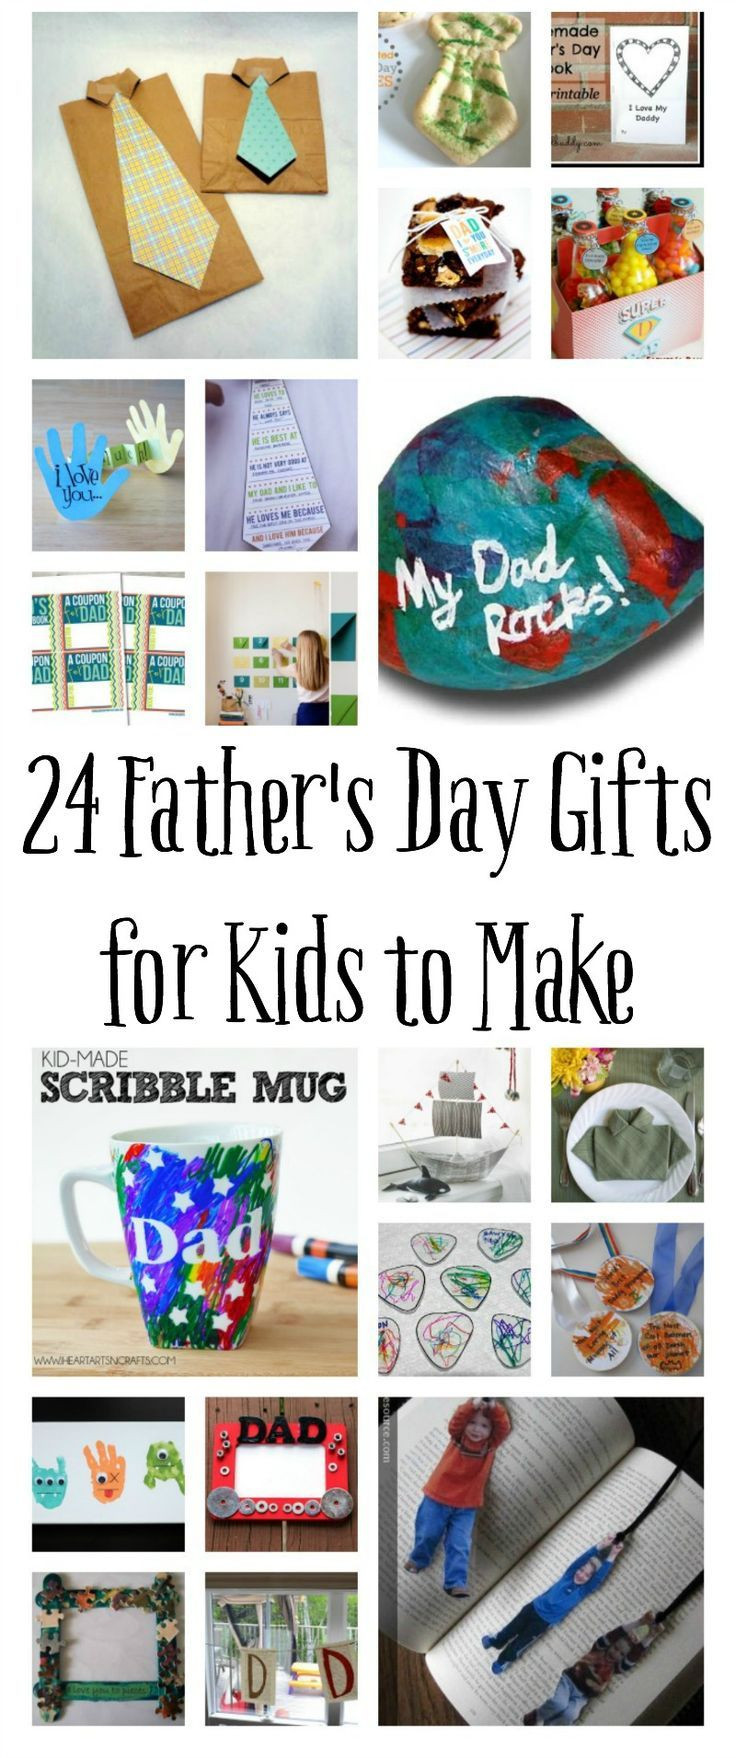 Gifts Kids Can Make For Dad
 100 Homemade Father s Day Gifts for Kids to Make